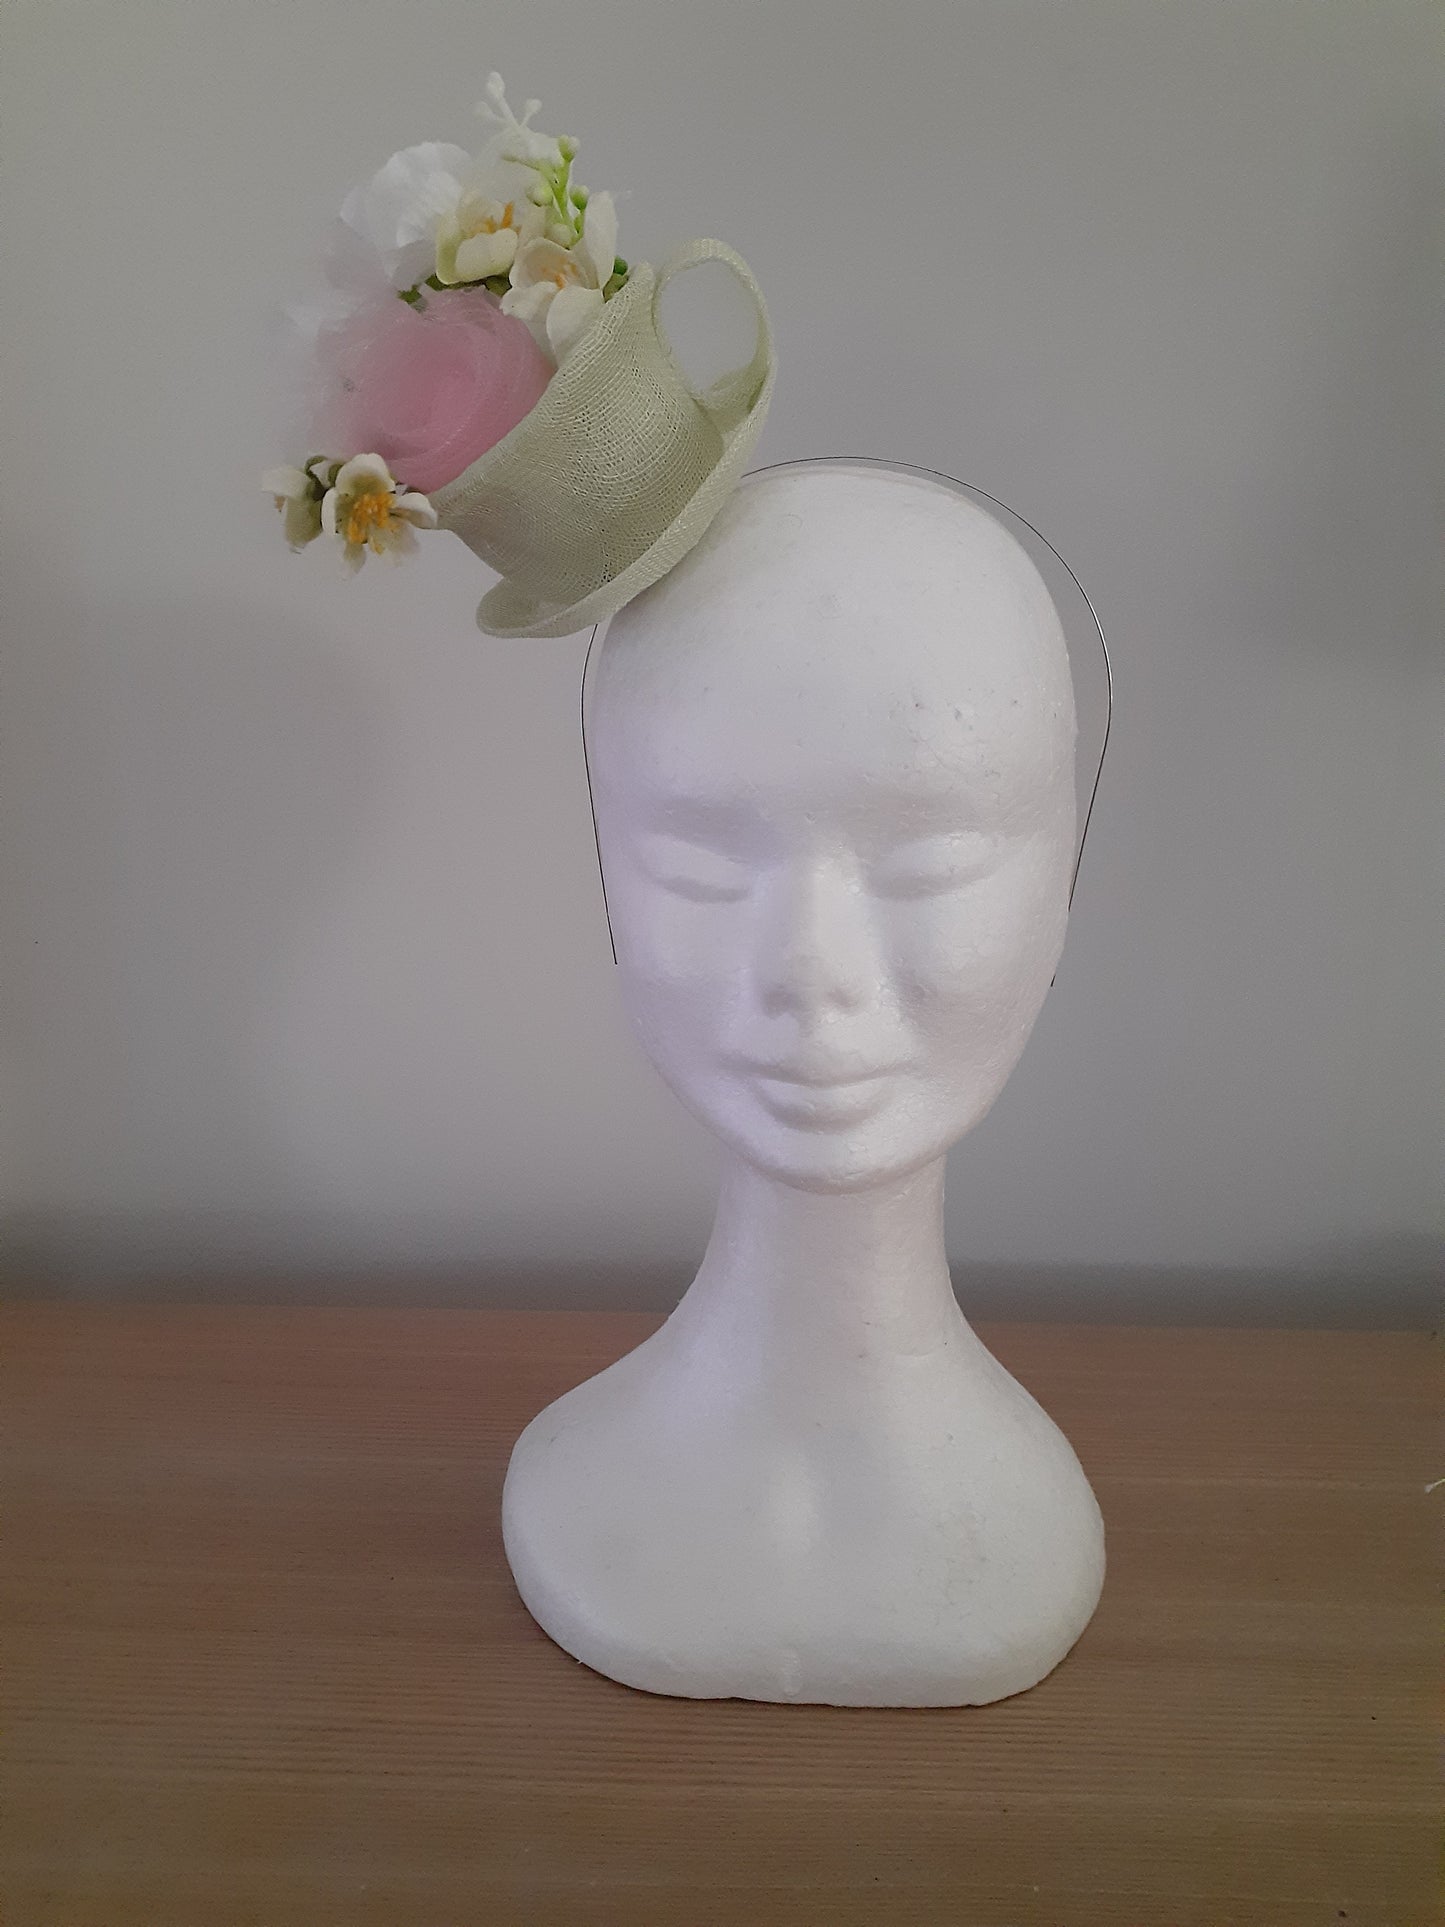 Green sinamay cup and saucer headpiece